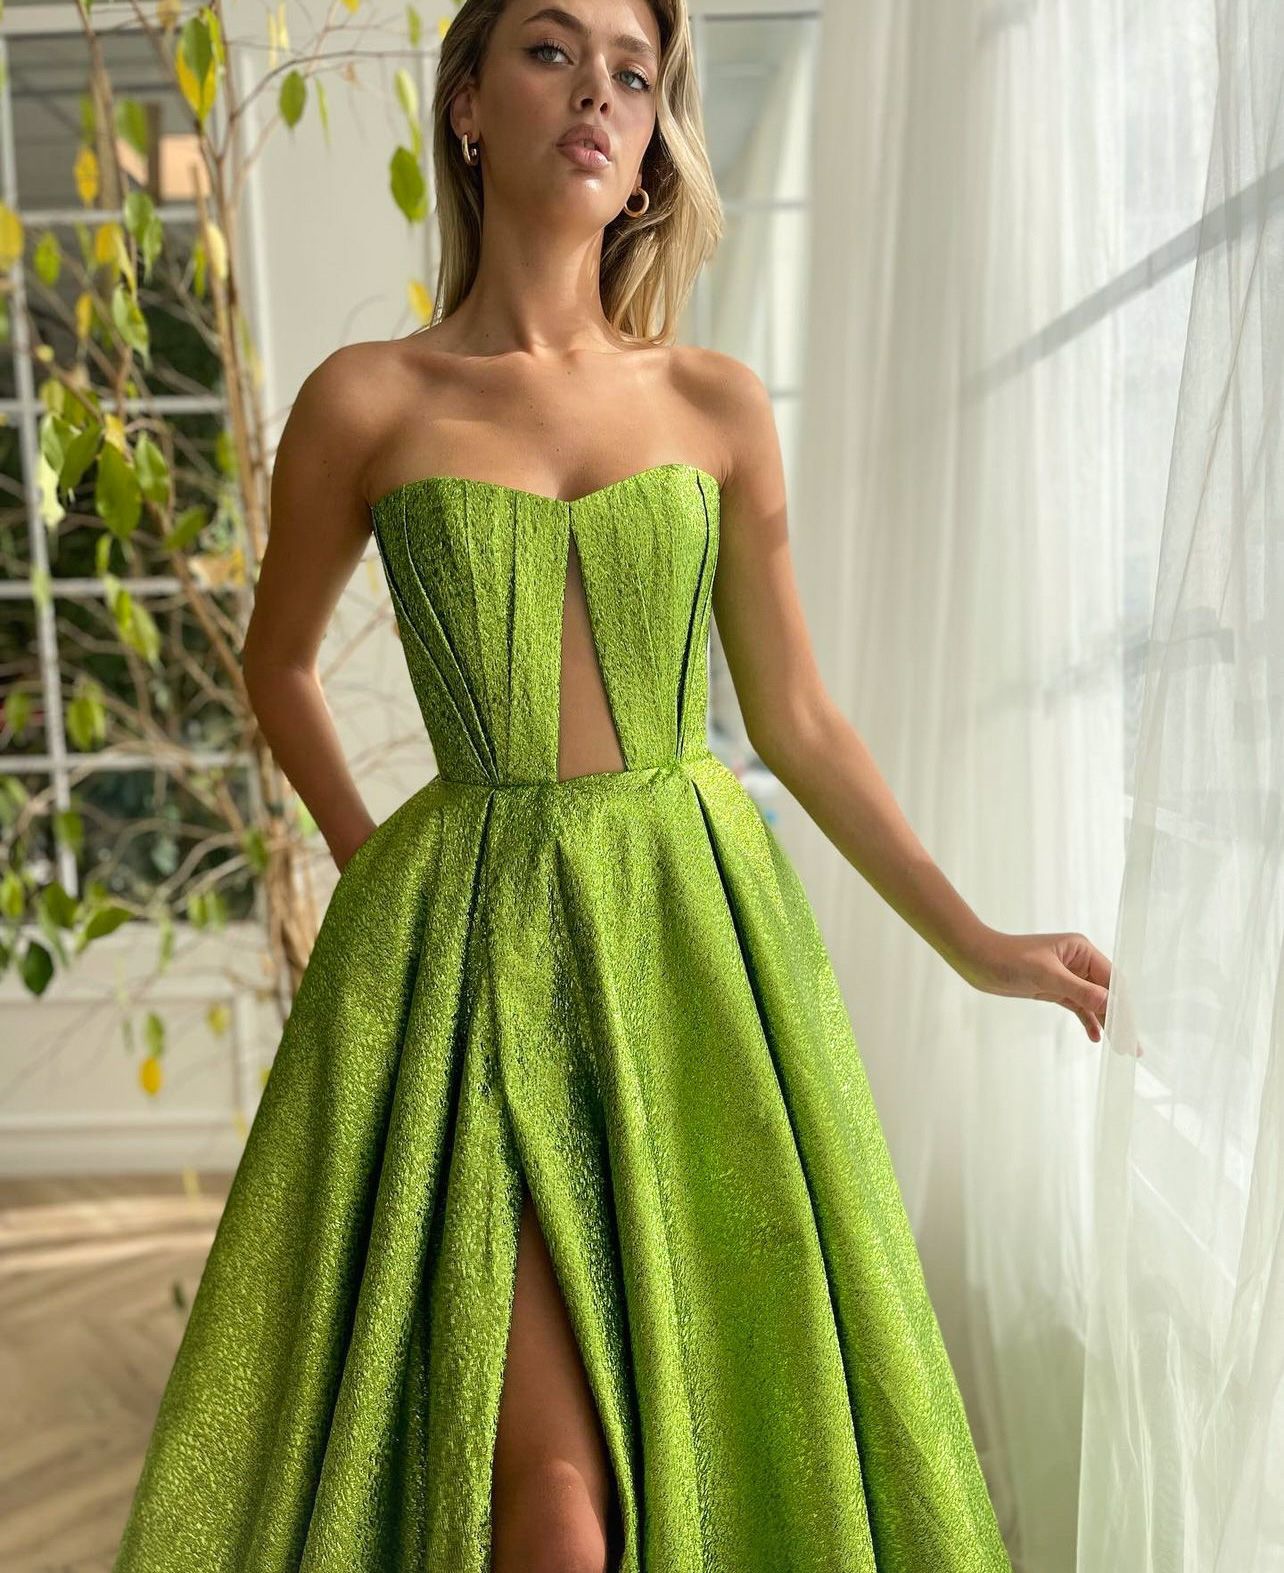 Green A-Line dress with no sleeves and shiny fabric